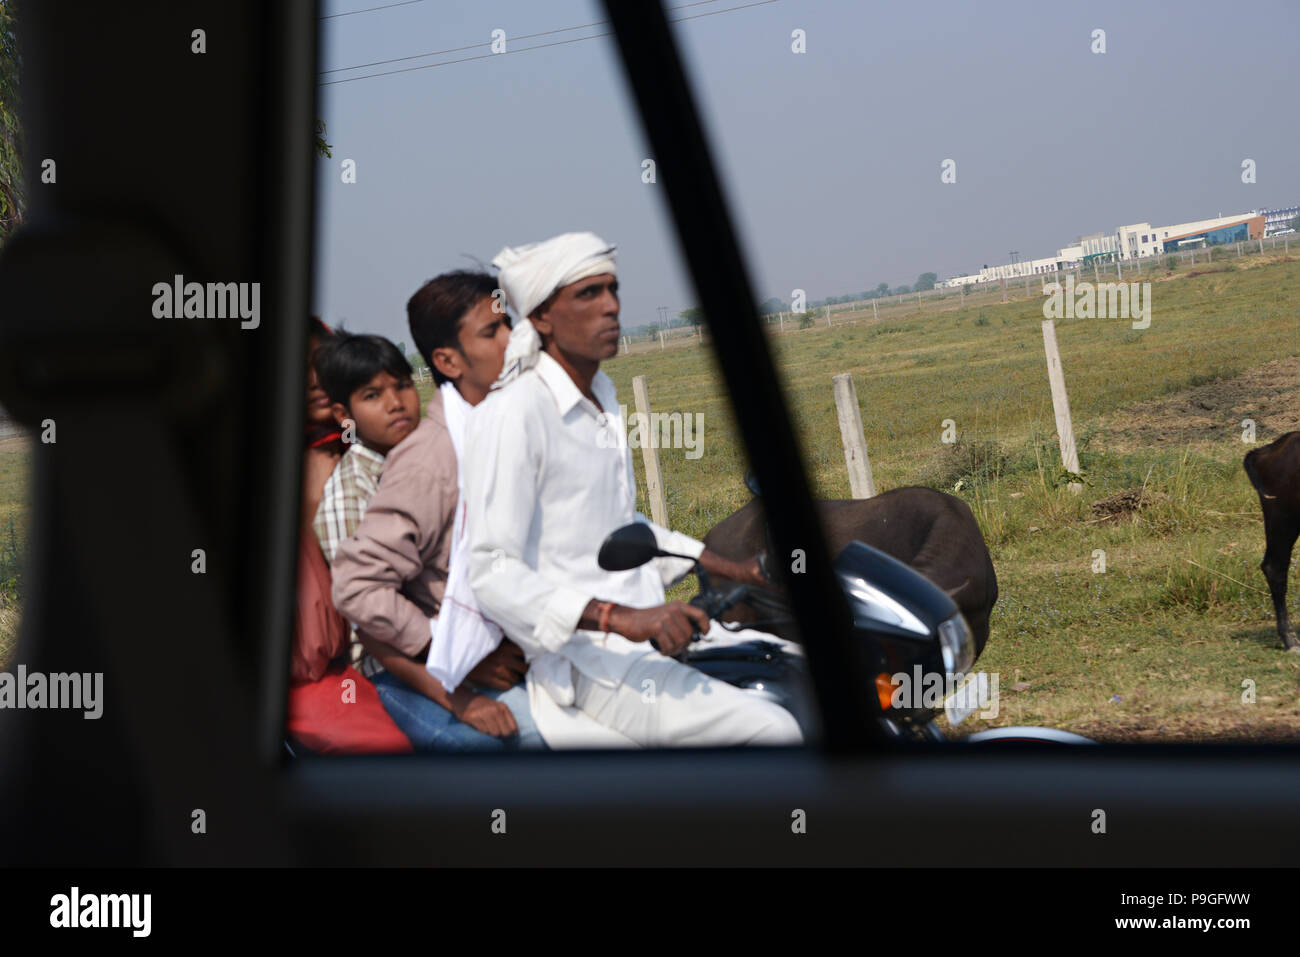 Street scenes of real life in Delhi India, photographed from a moving vehicle Stock Photo